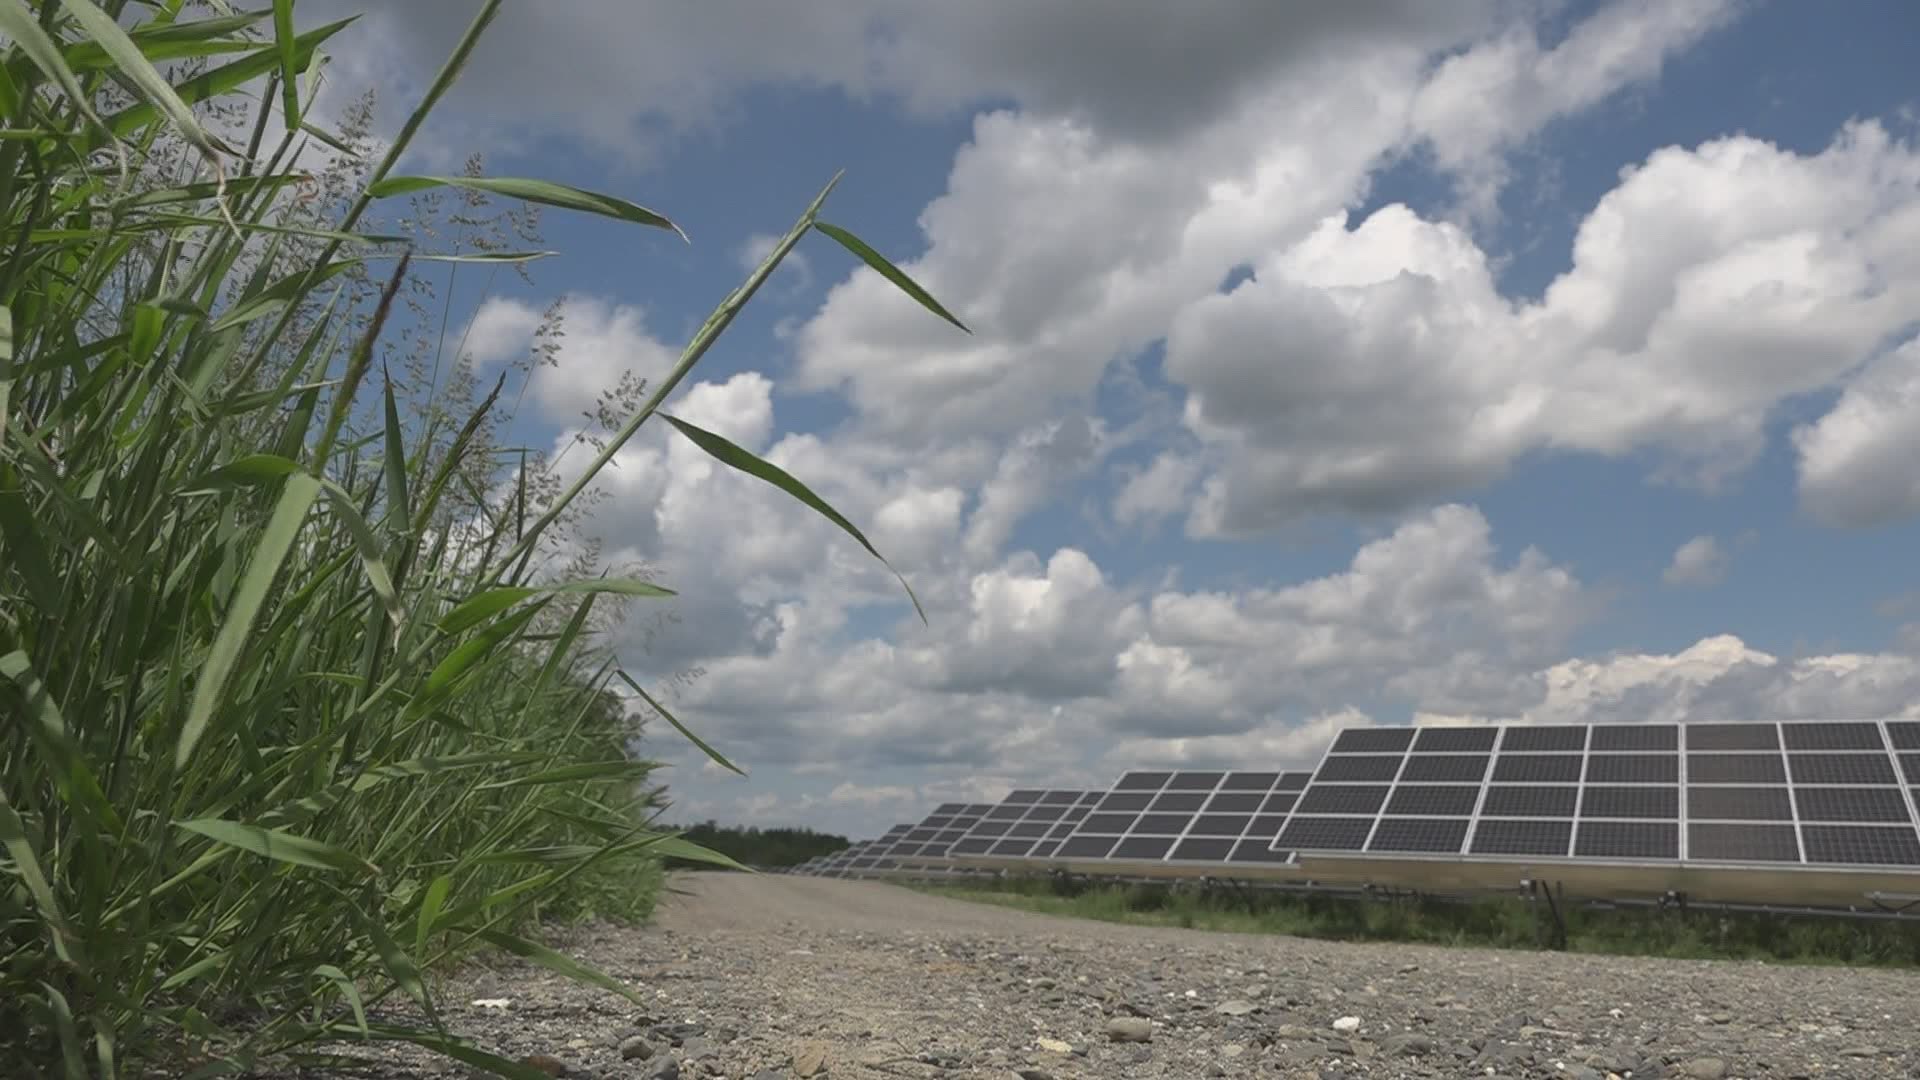 As Maine continues its investment in renewable energy, one solar farm is setting the standard for similar projects to come.